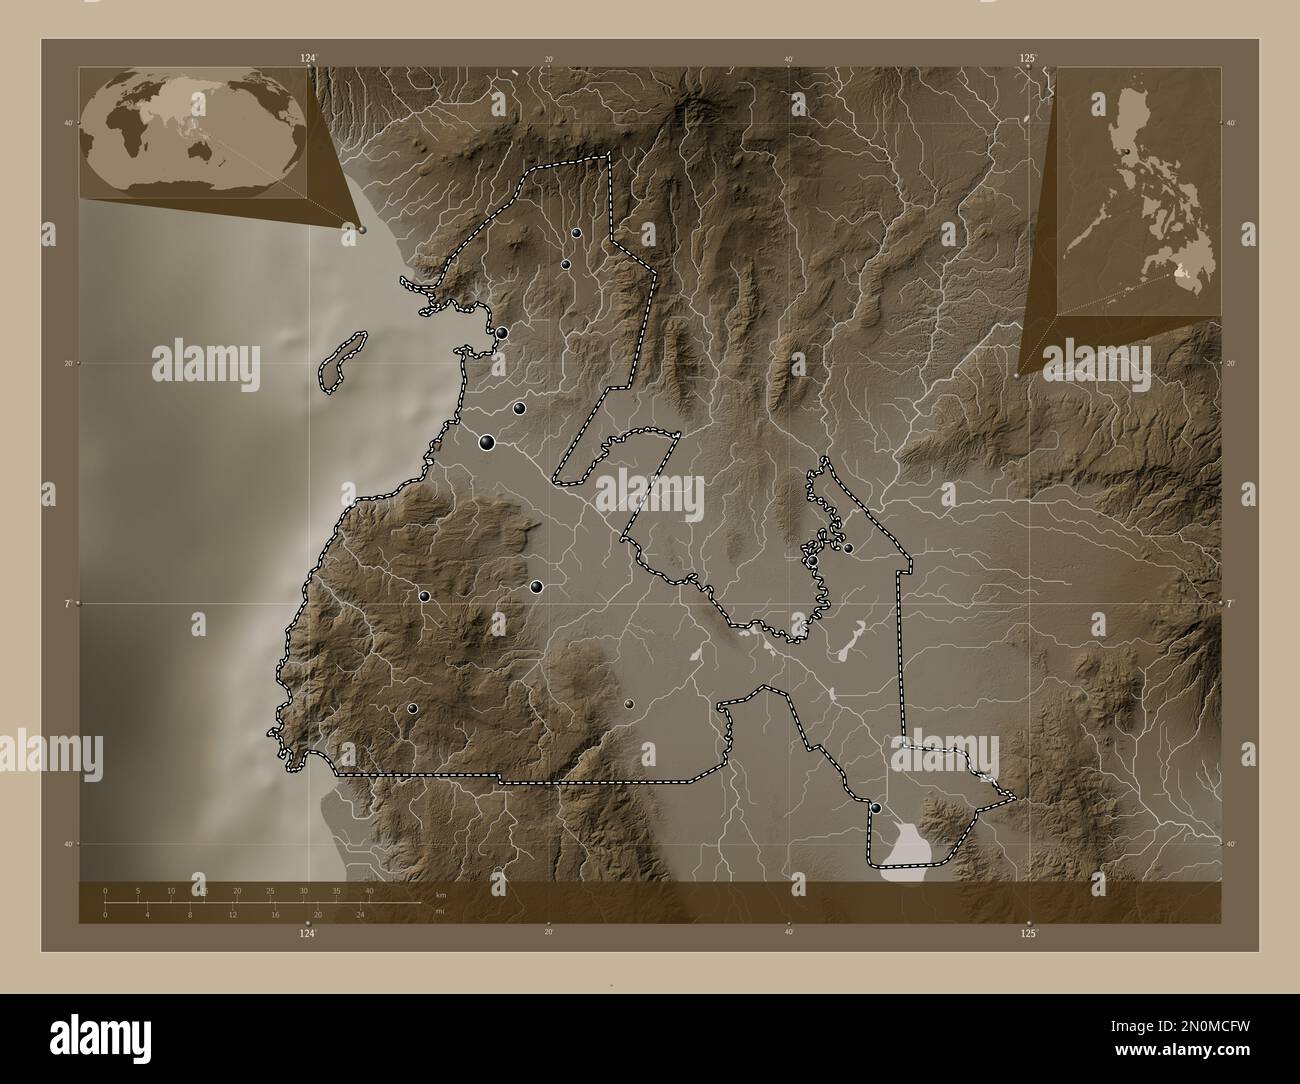 Maguindanao, province of Philippines. Elevation map colored in sepia tones with lakes and rivers. Locations of major cities of the region. Corner auxi Stock Photo